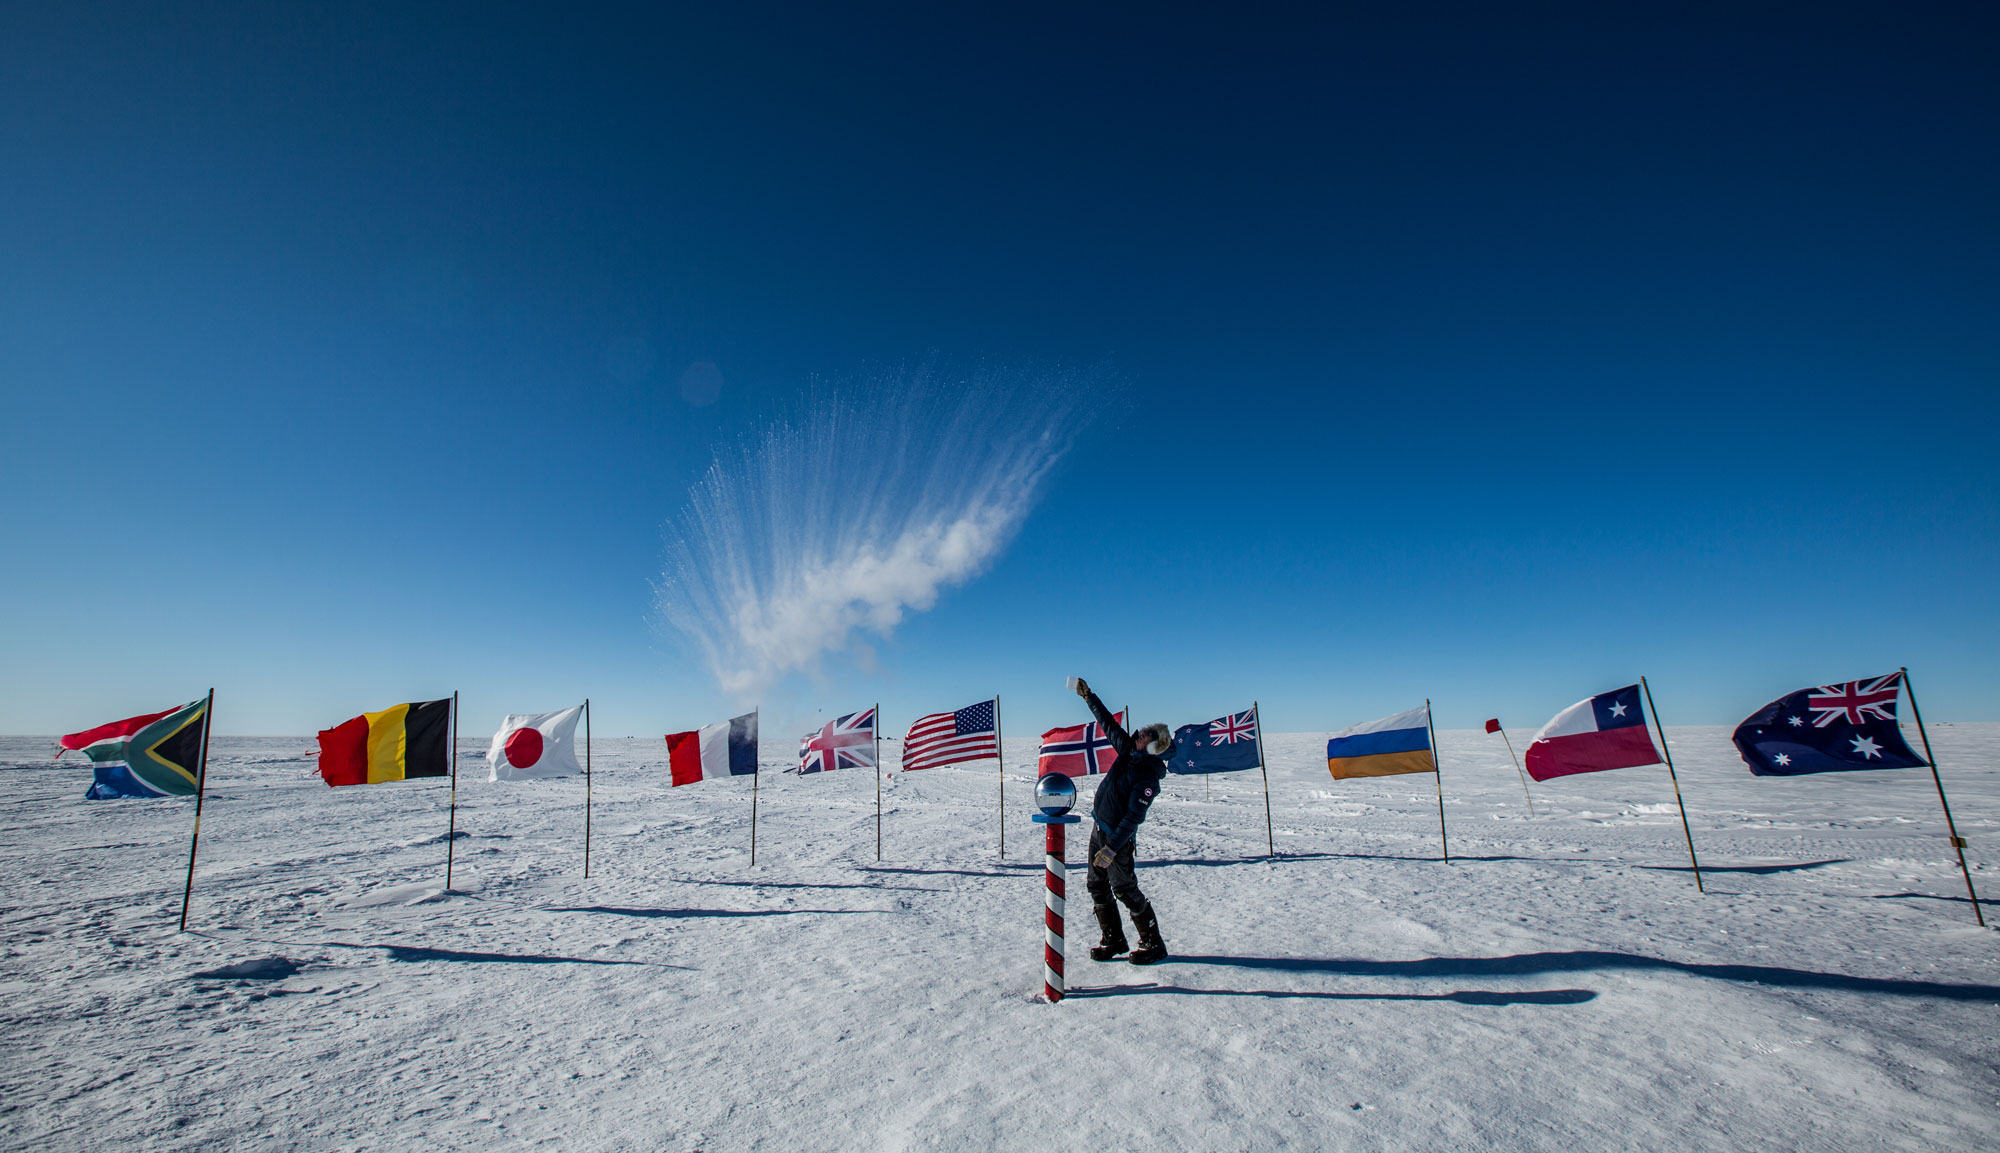 Ceremonial South Pole by Eric Larsen